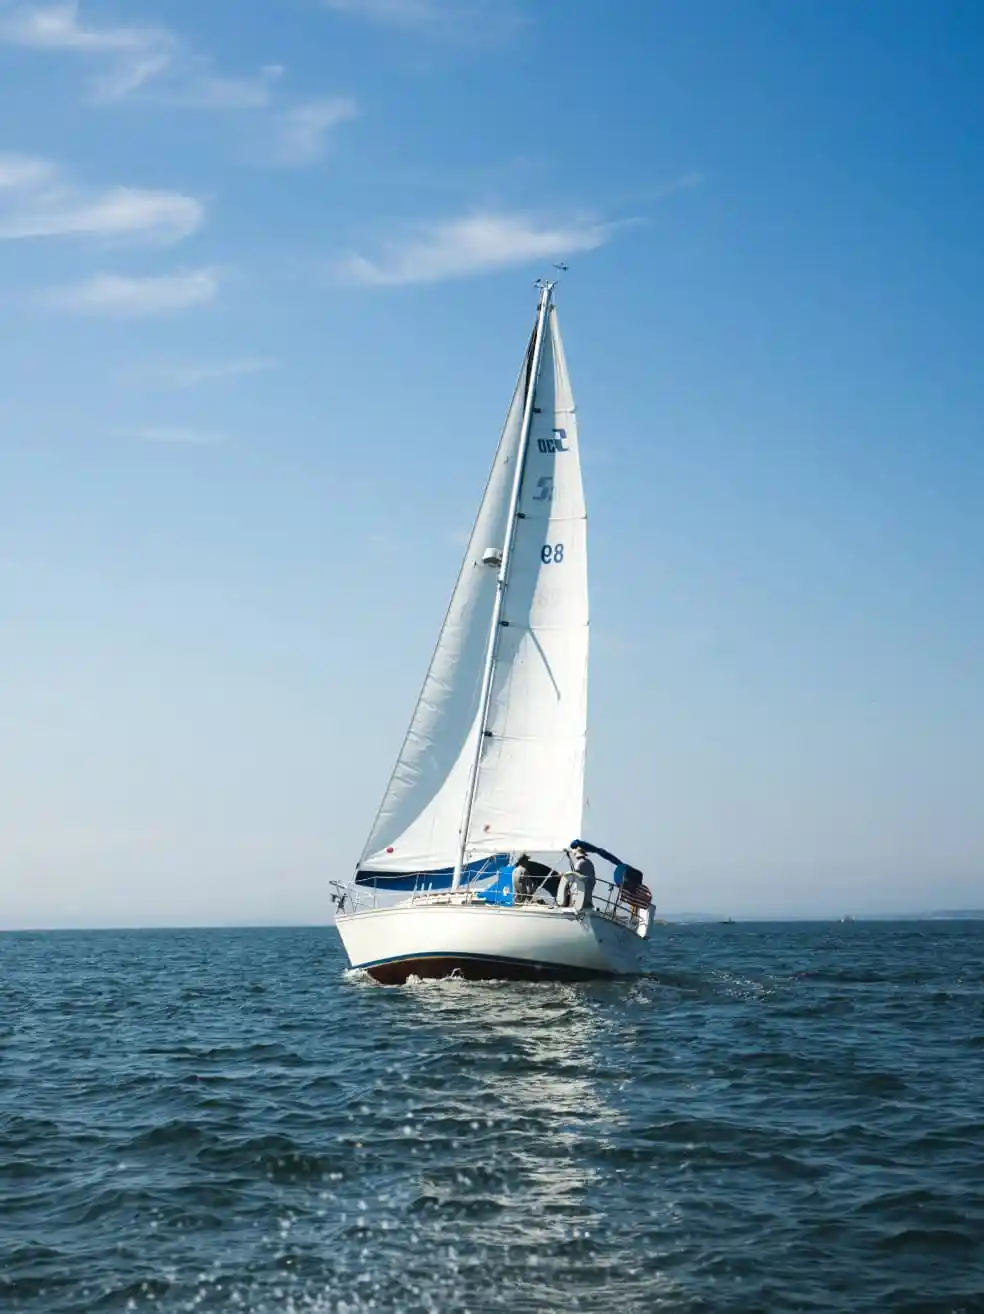 Sailboat on open water